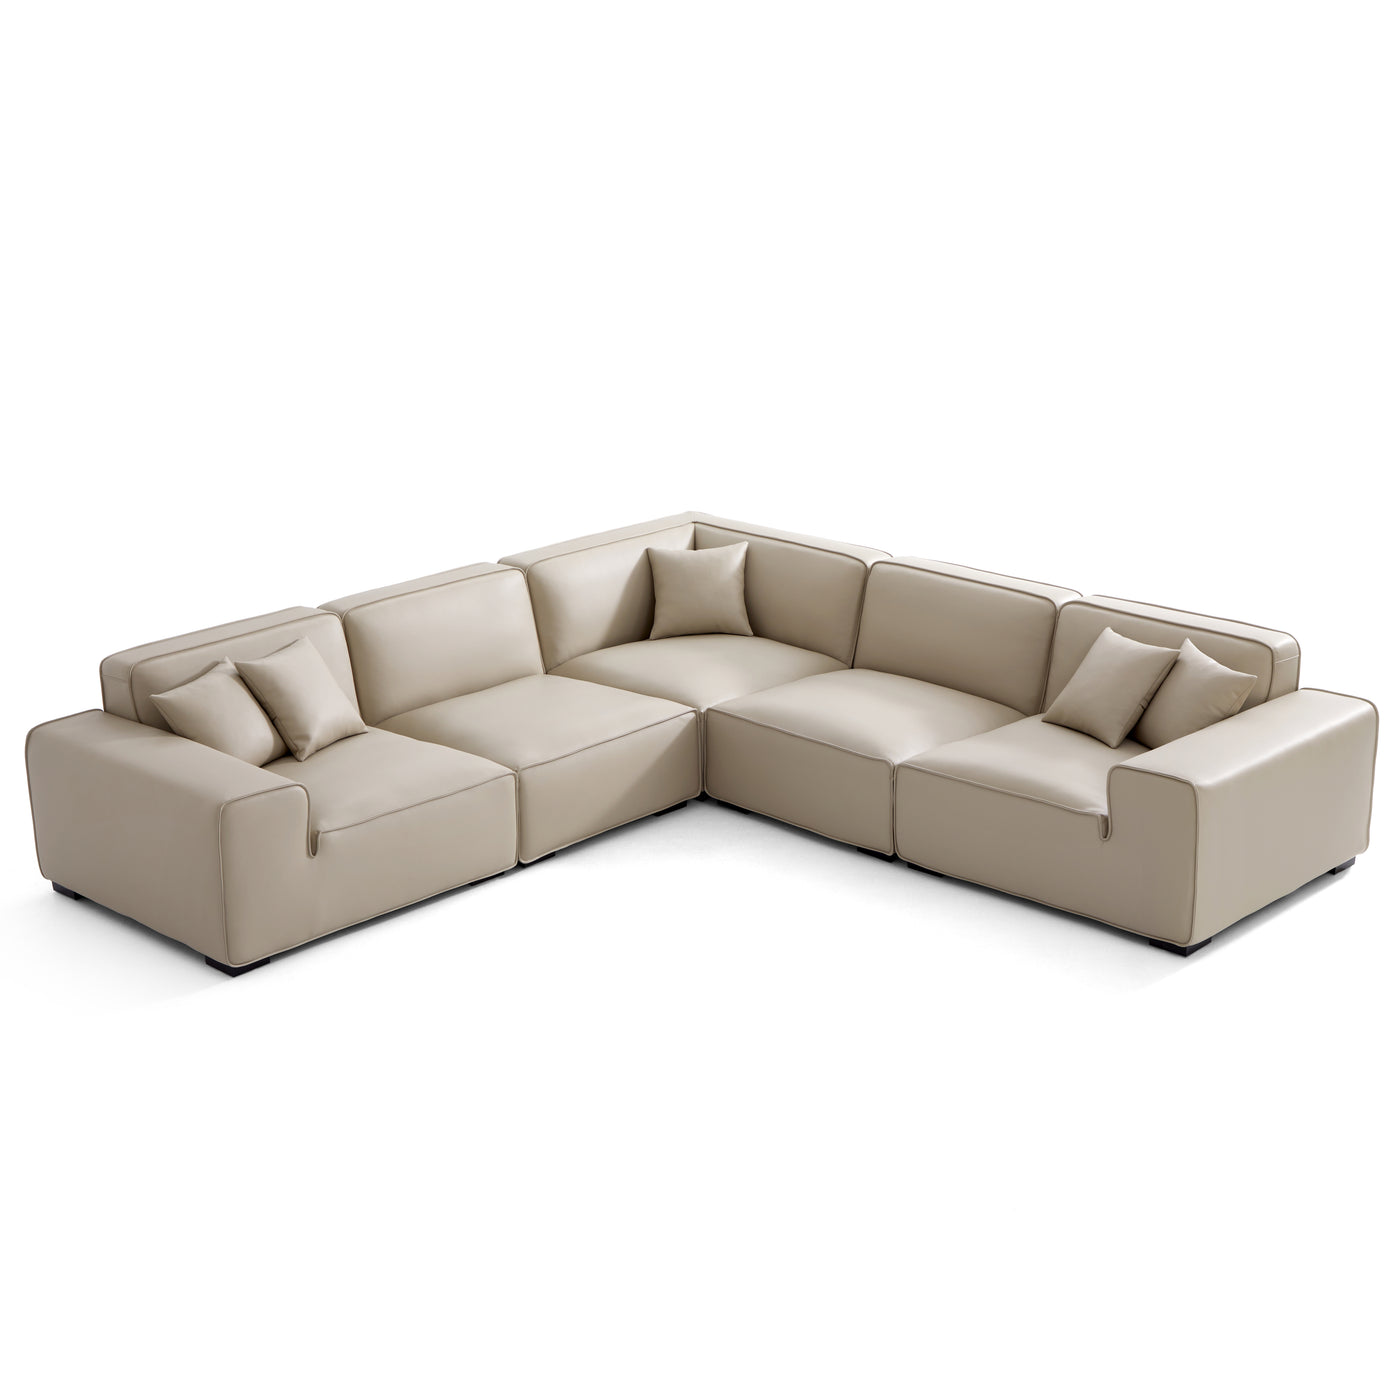 Domus Modular Black Leather L Shaped Sectional-Beige-126.8"